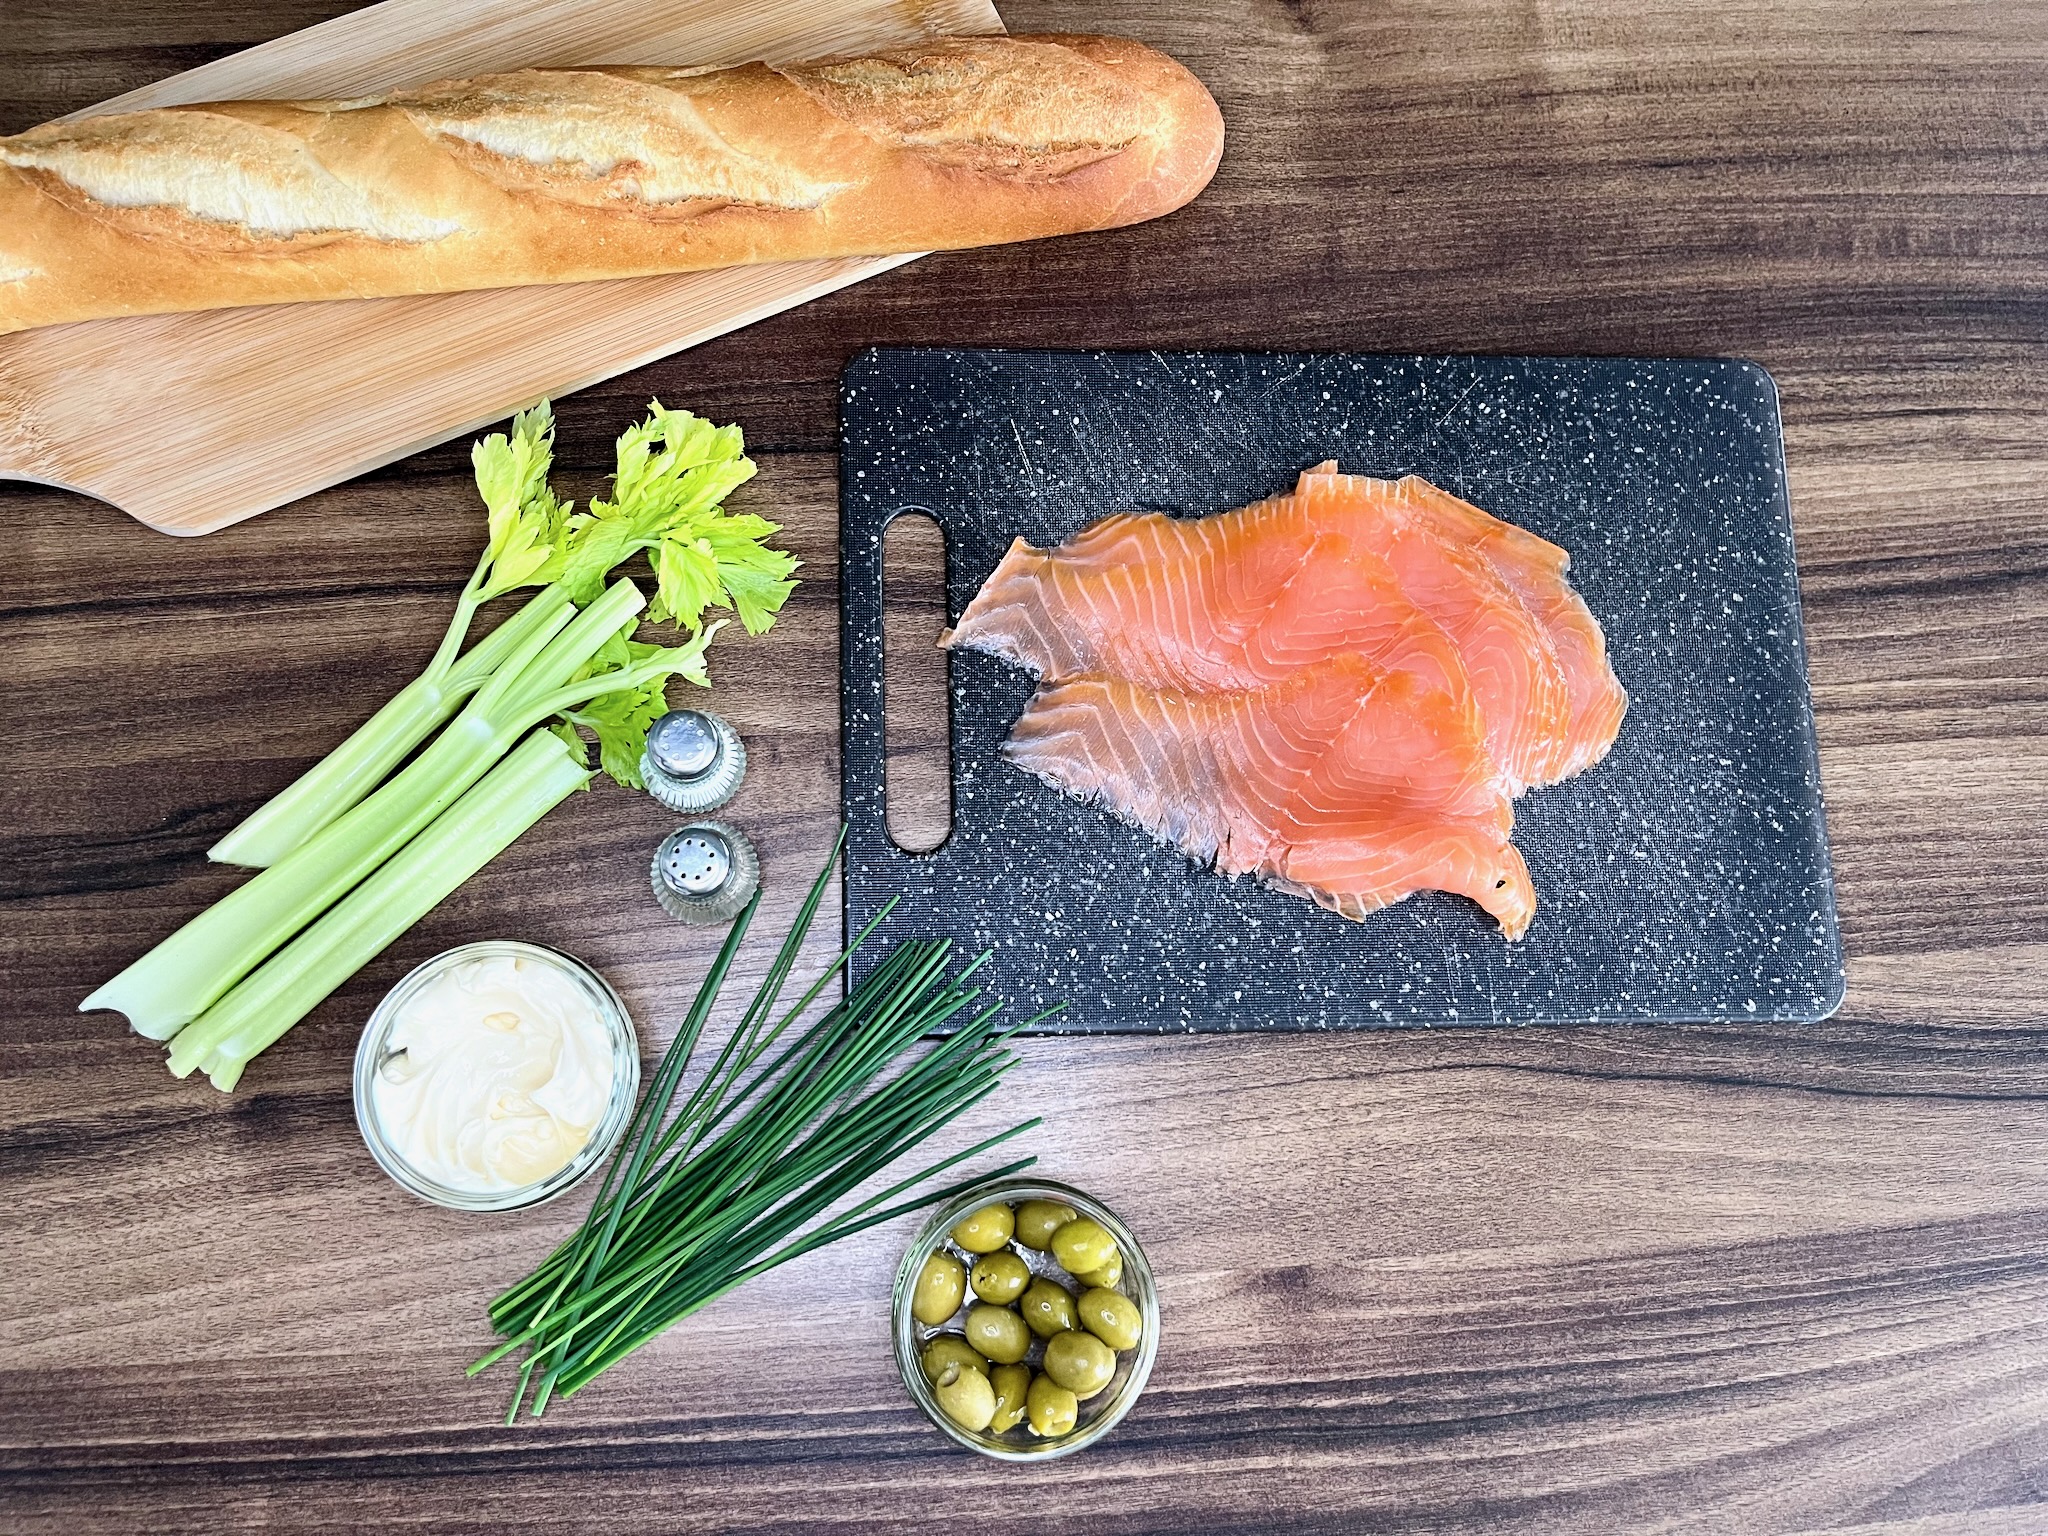 All ingredients are ready to make Smoked Salmon Sandwich filling